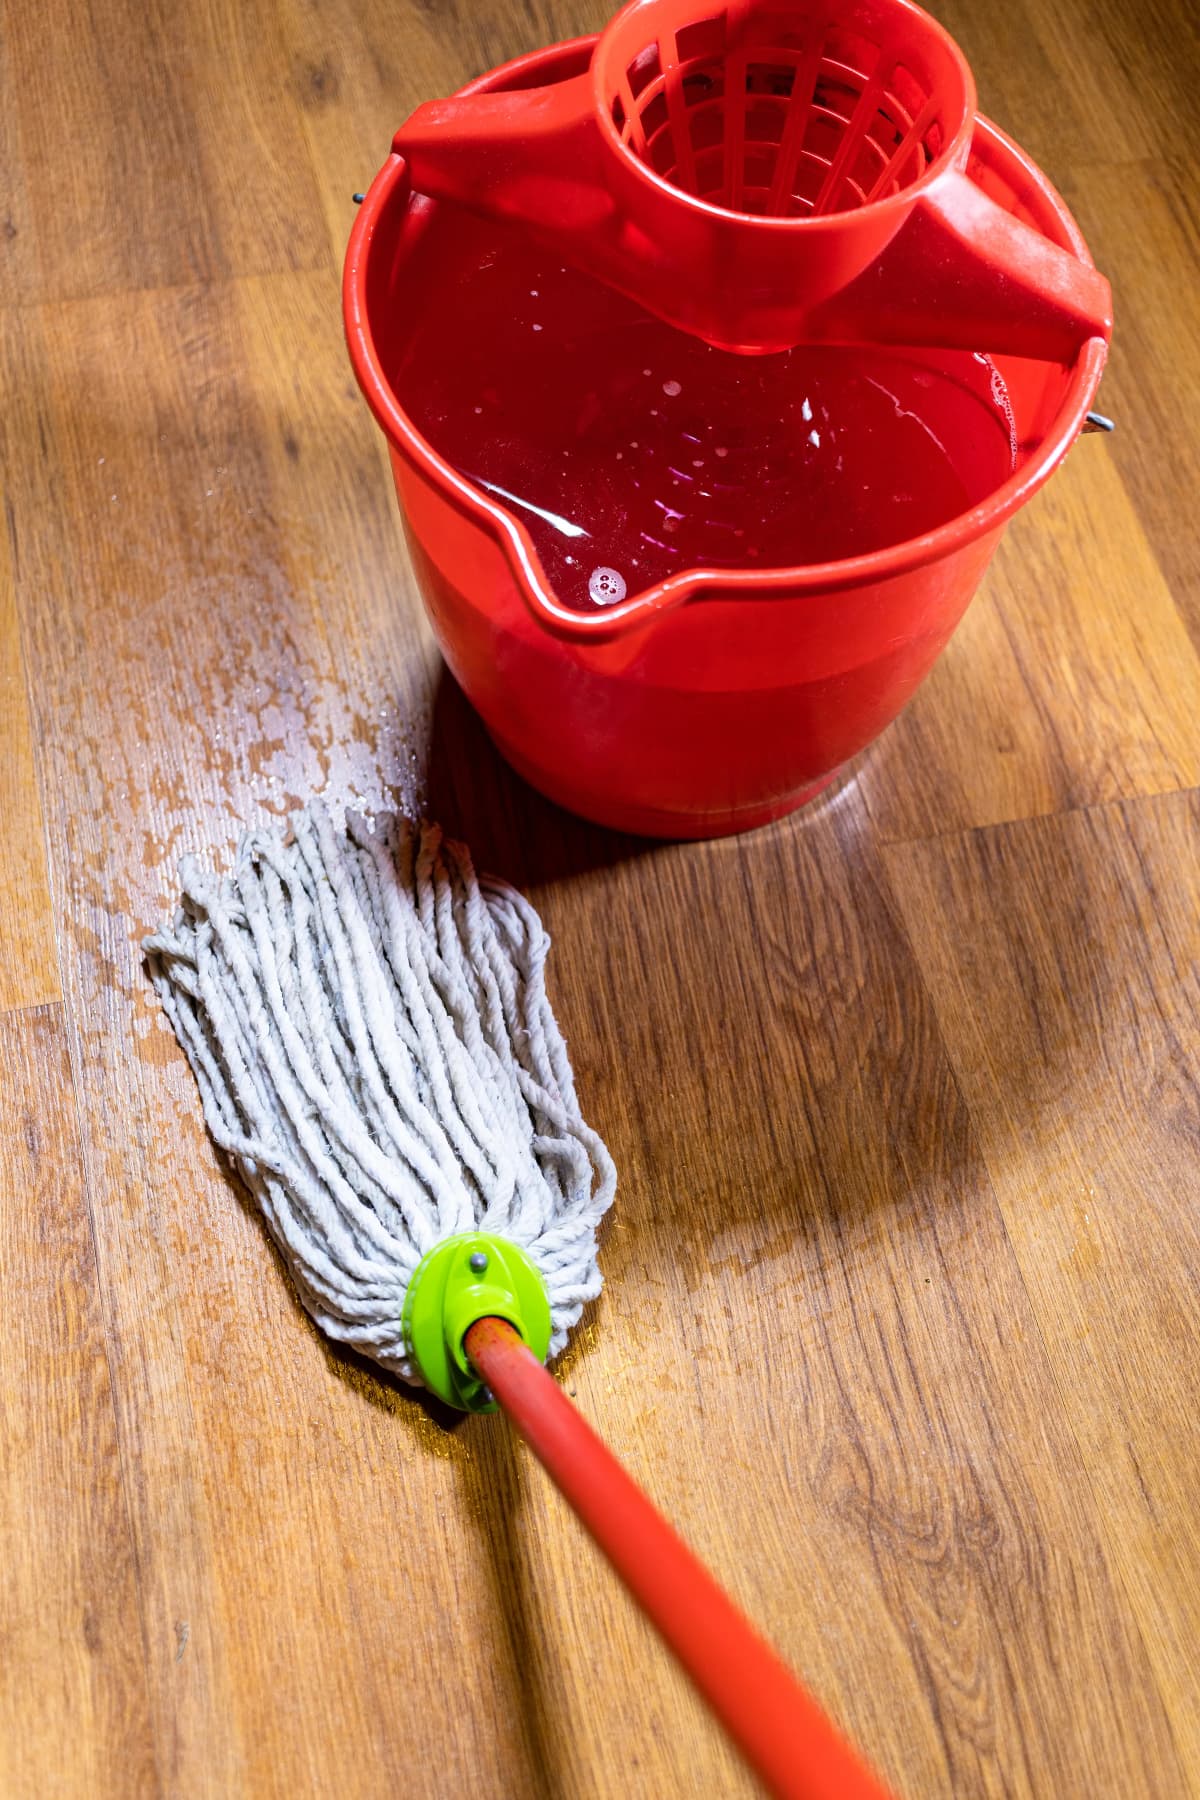 Mop and water bucket on a wood floor